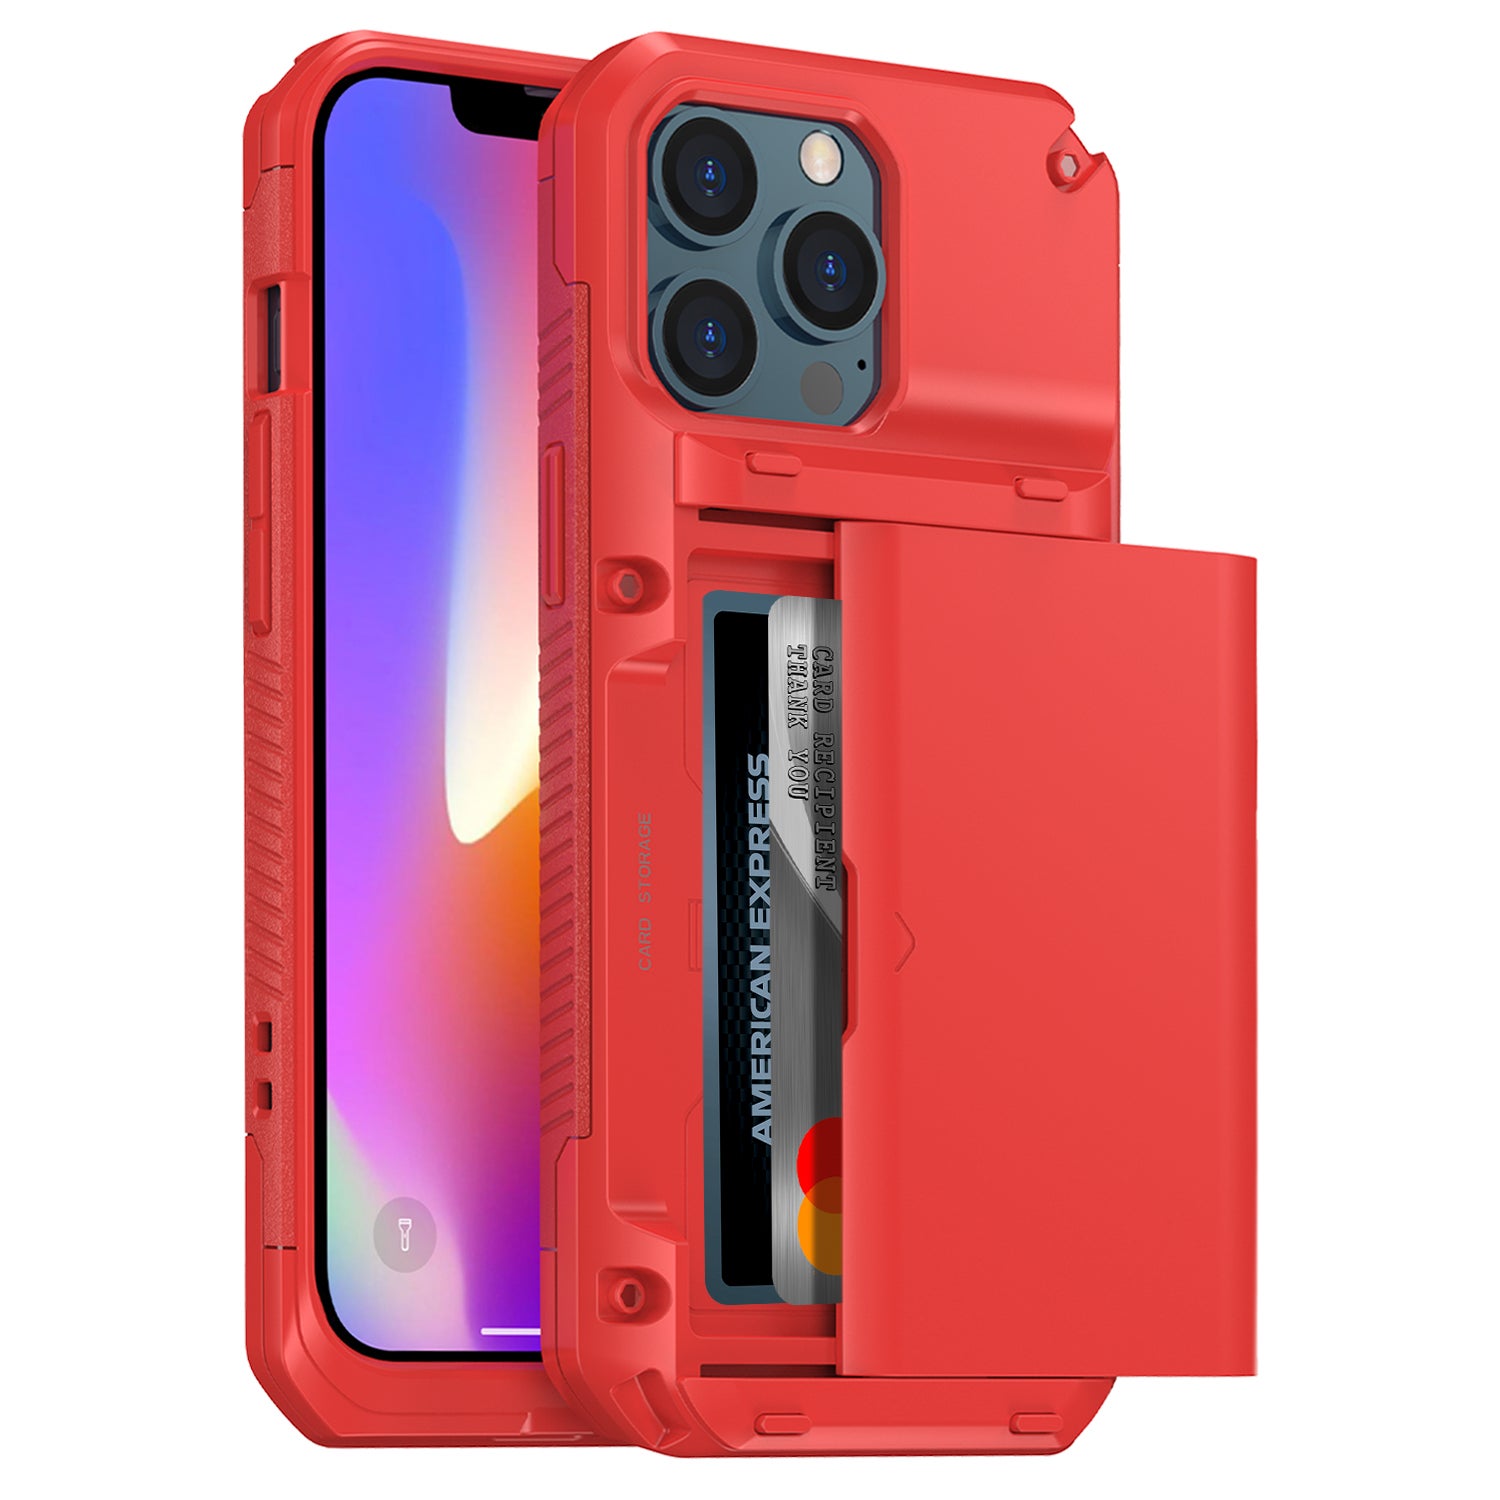 ZUSLAB Armor Plus Case for iPhone 13 Pro Max 6.7" Credit Card Holder Wallet Protective Shockproof Cover for Apple - Red